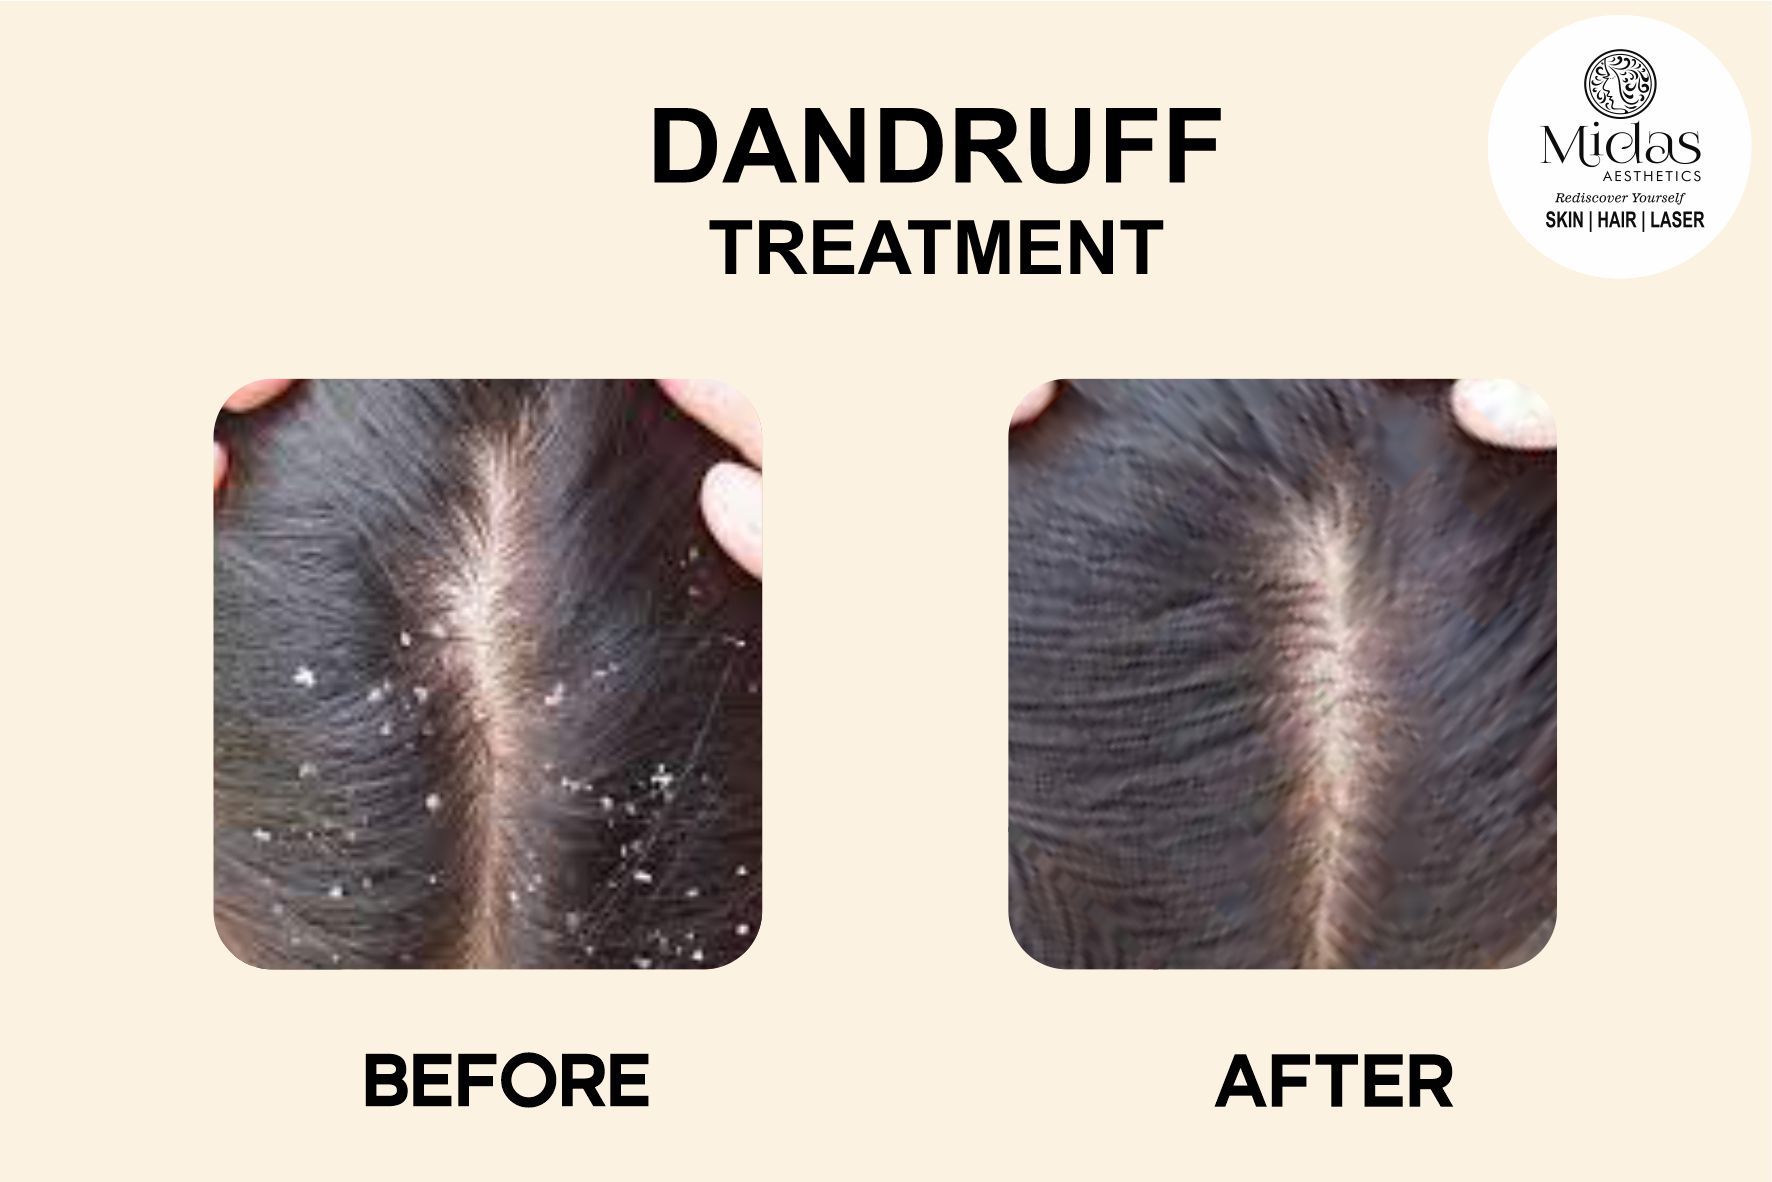 DANDRUFF Treatment before and after images